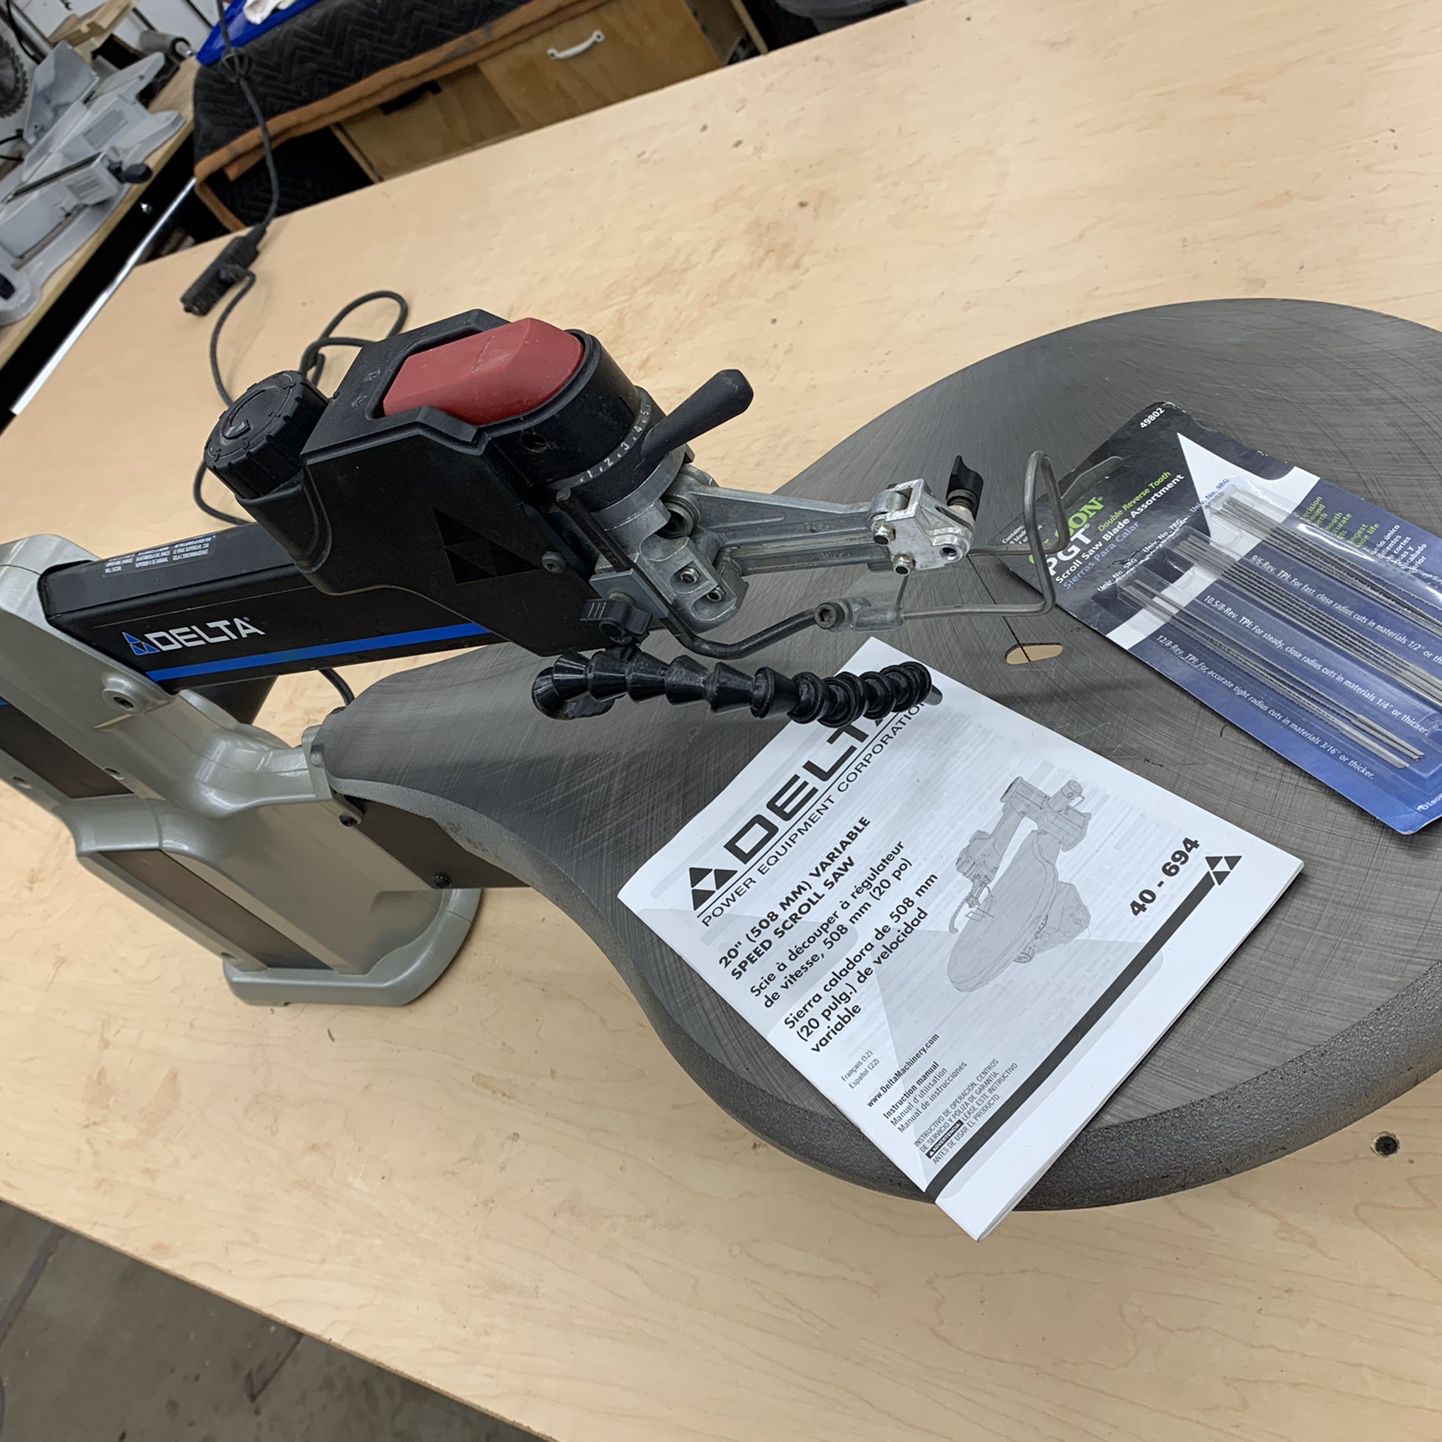 Delta Scroll Saw 20” for Sale in Ripon, CA OfferUp